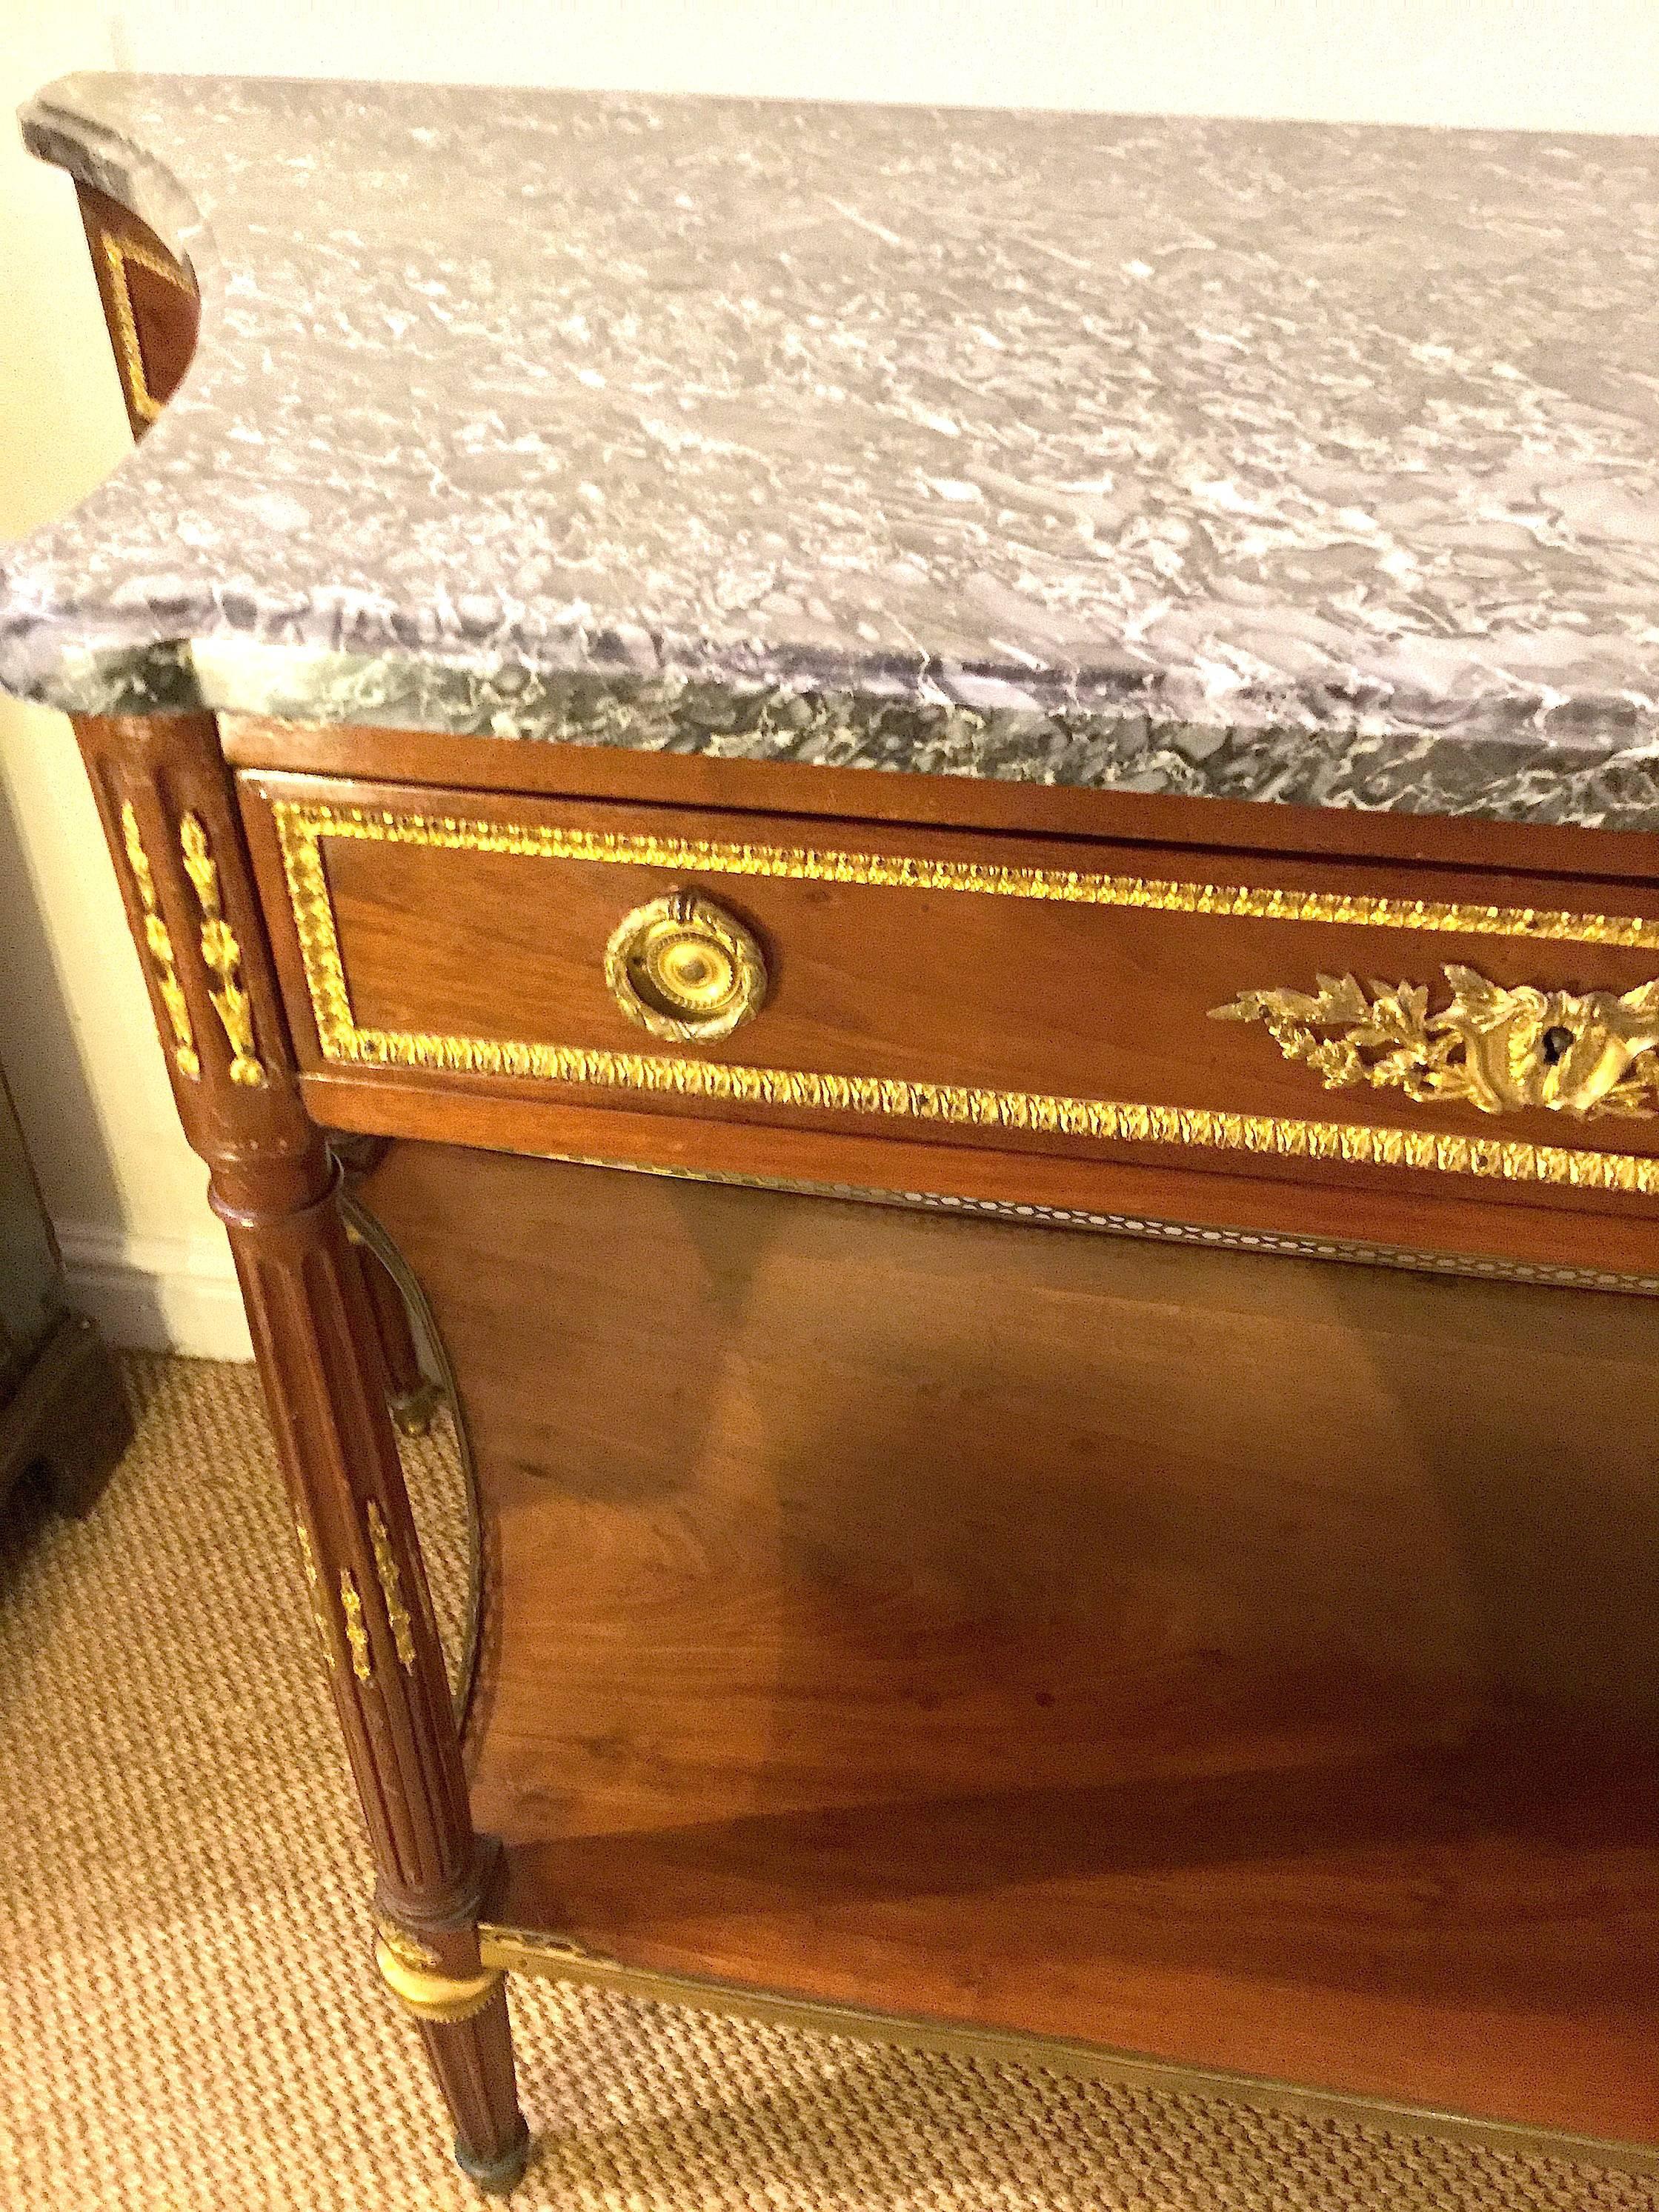 This Louis XVI ormolu-mounted 18th century console Desserte by Jean-Jacques Manser. dit. Mantzer with Saint-Anne des Pyrenees marble-top has a pierced brass galleried undertier. Beautifully decorated with gilt bronze trim to the legs and fluted